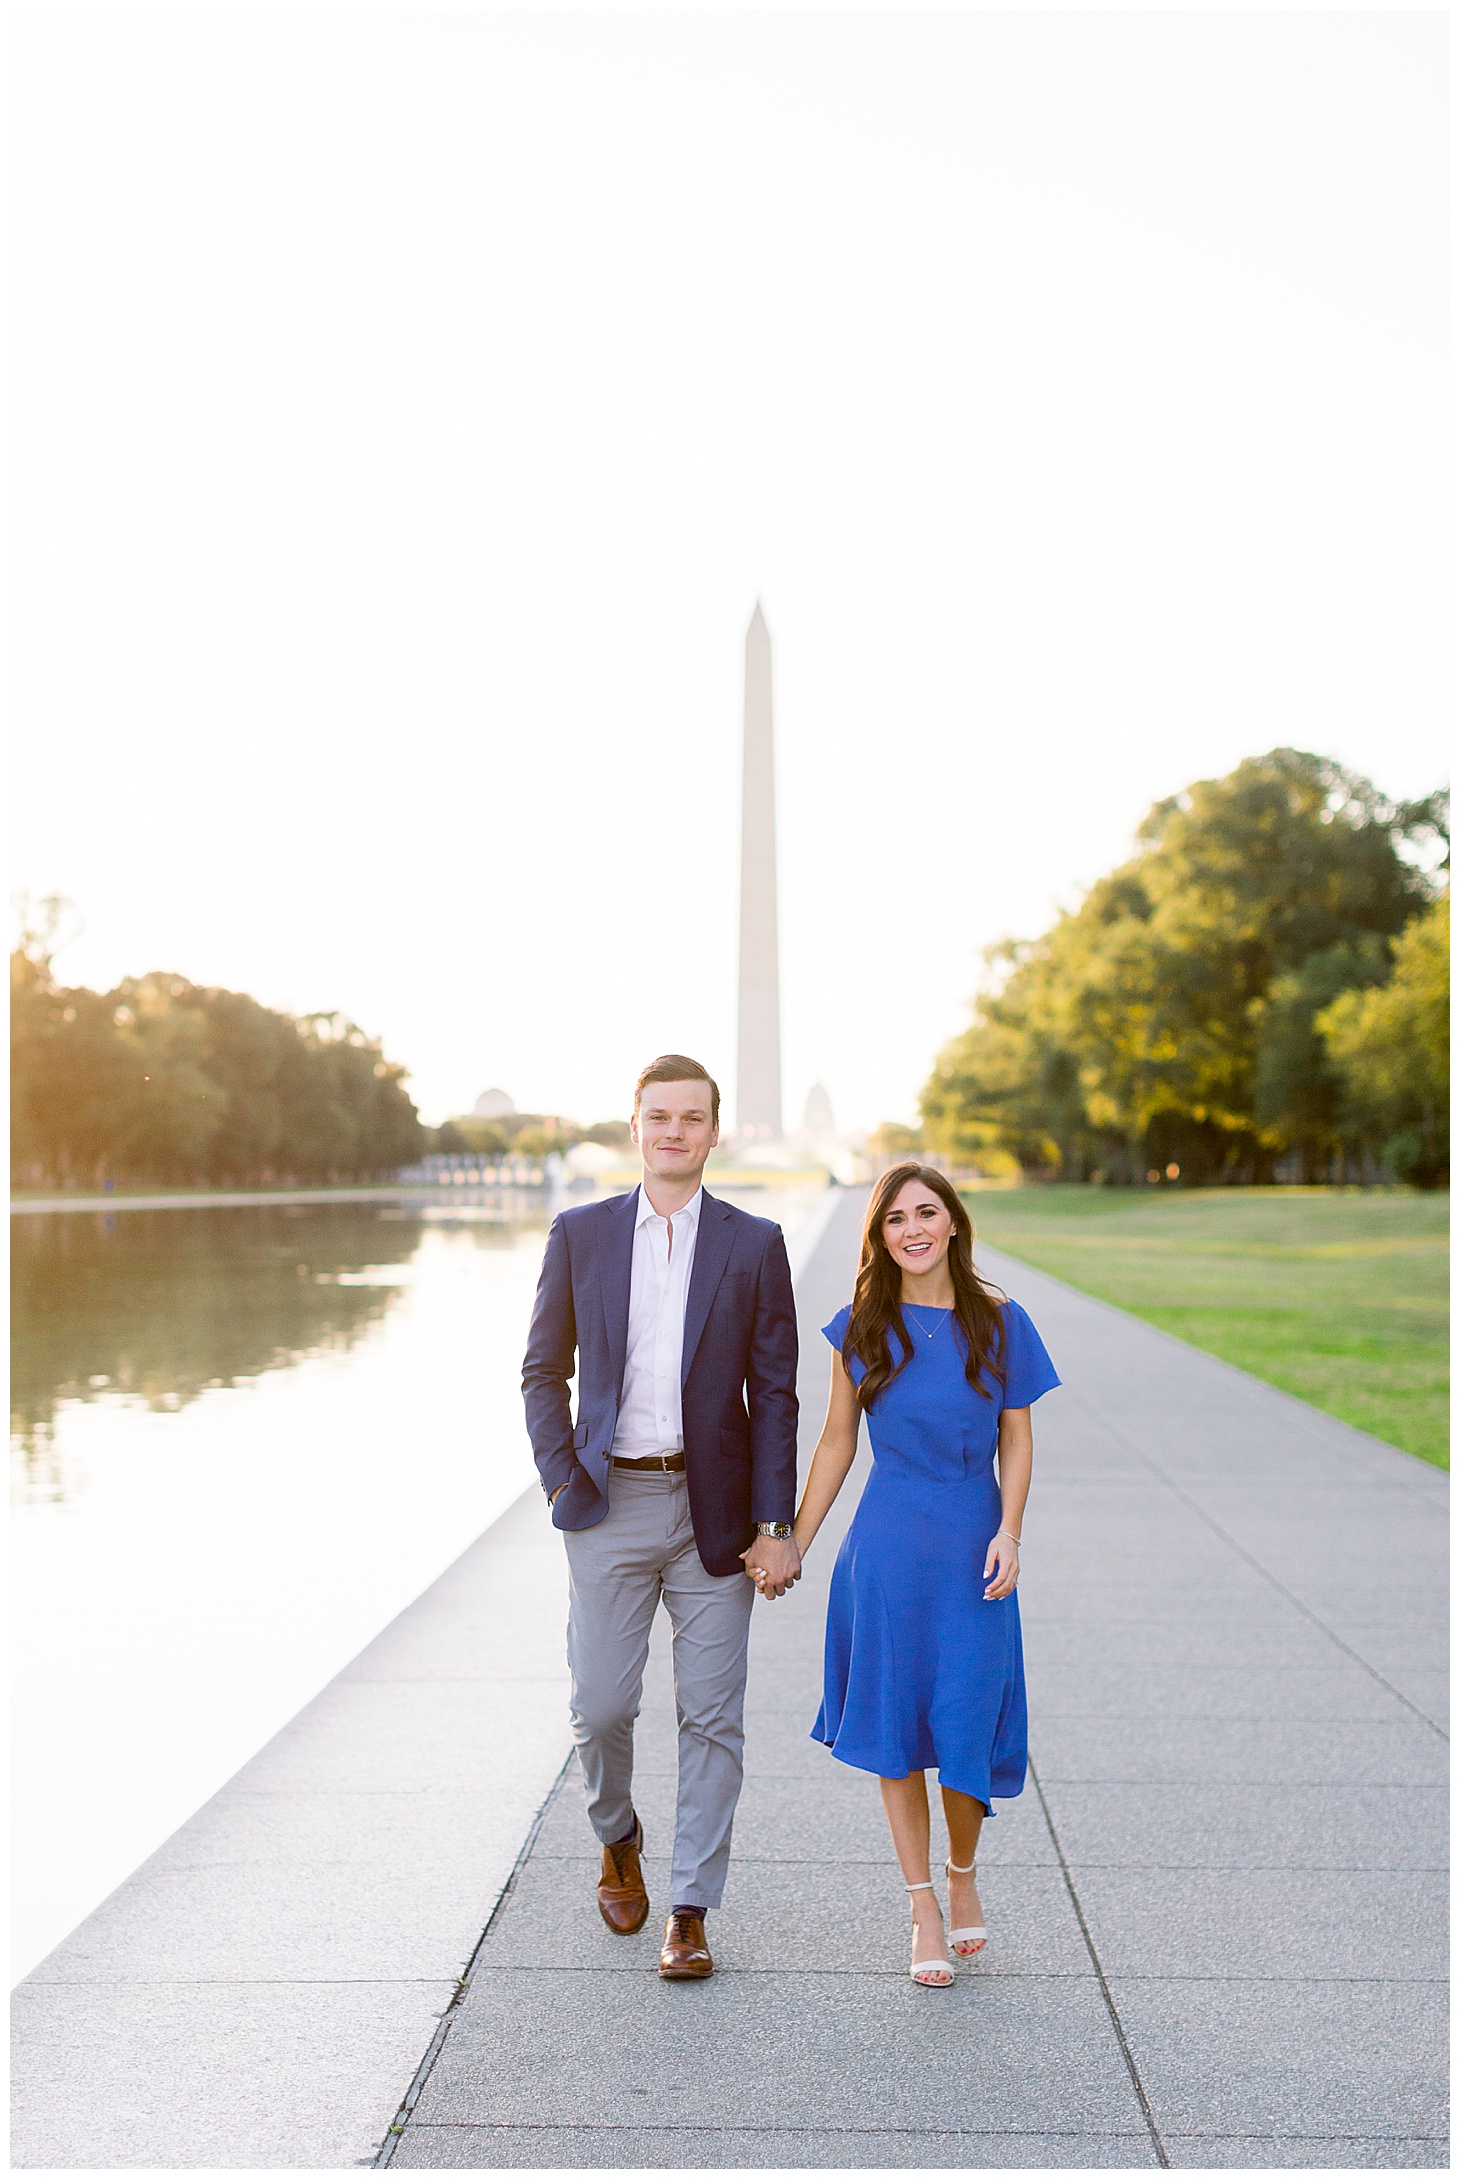 Preppy Morning Engagement Portraits at Lincoln Memorial Reflecting Pool by Sarah Bradshaw Photography, Golden Light Portraits 